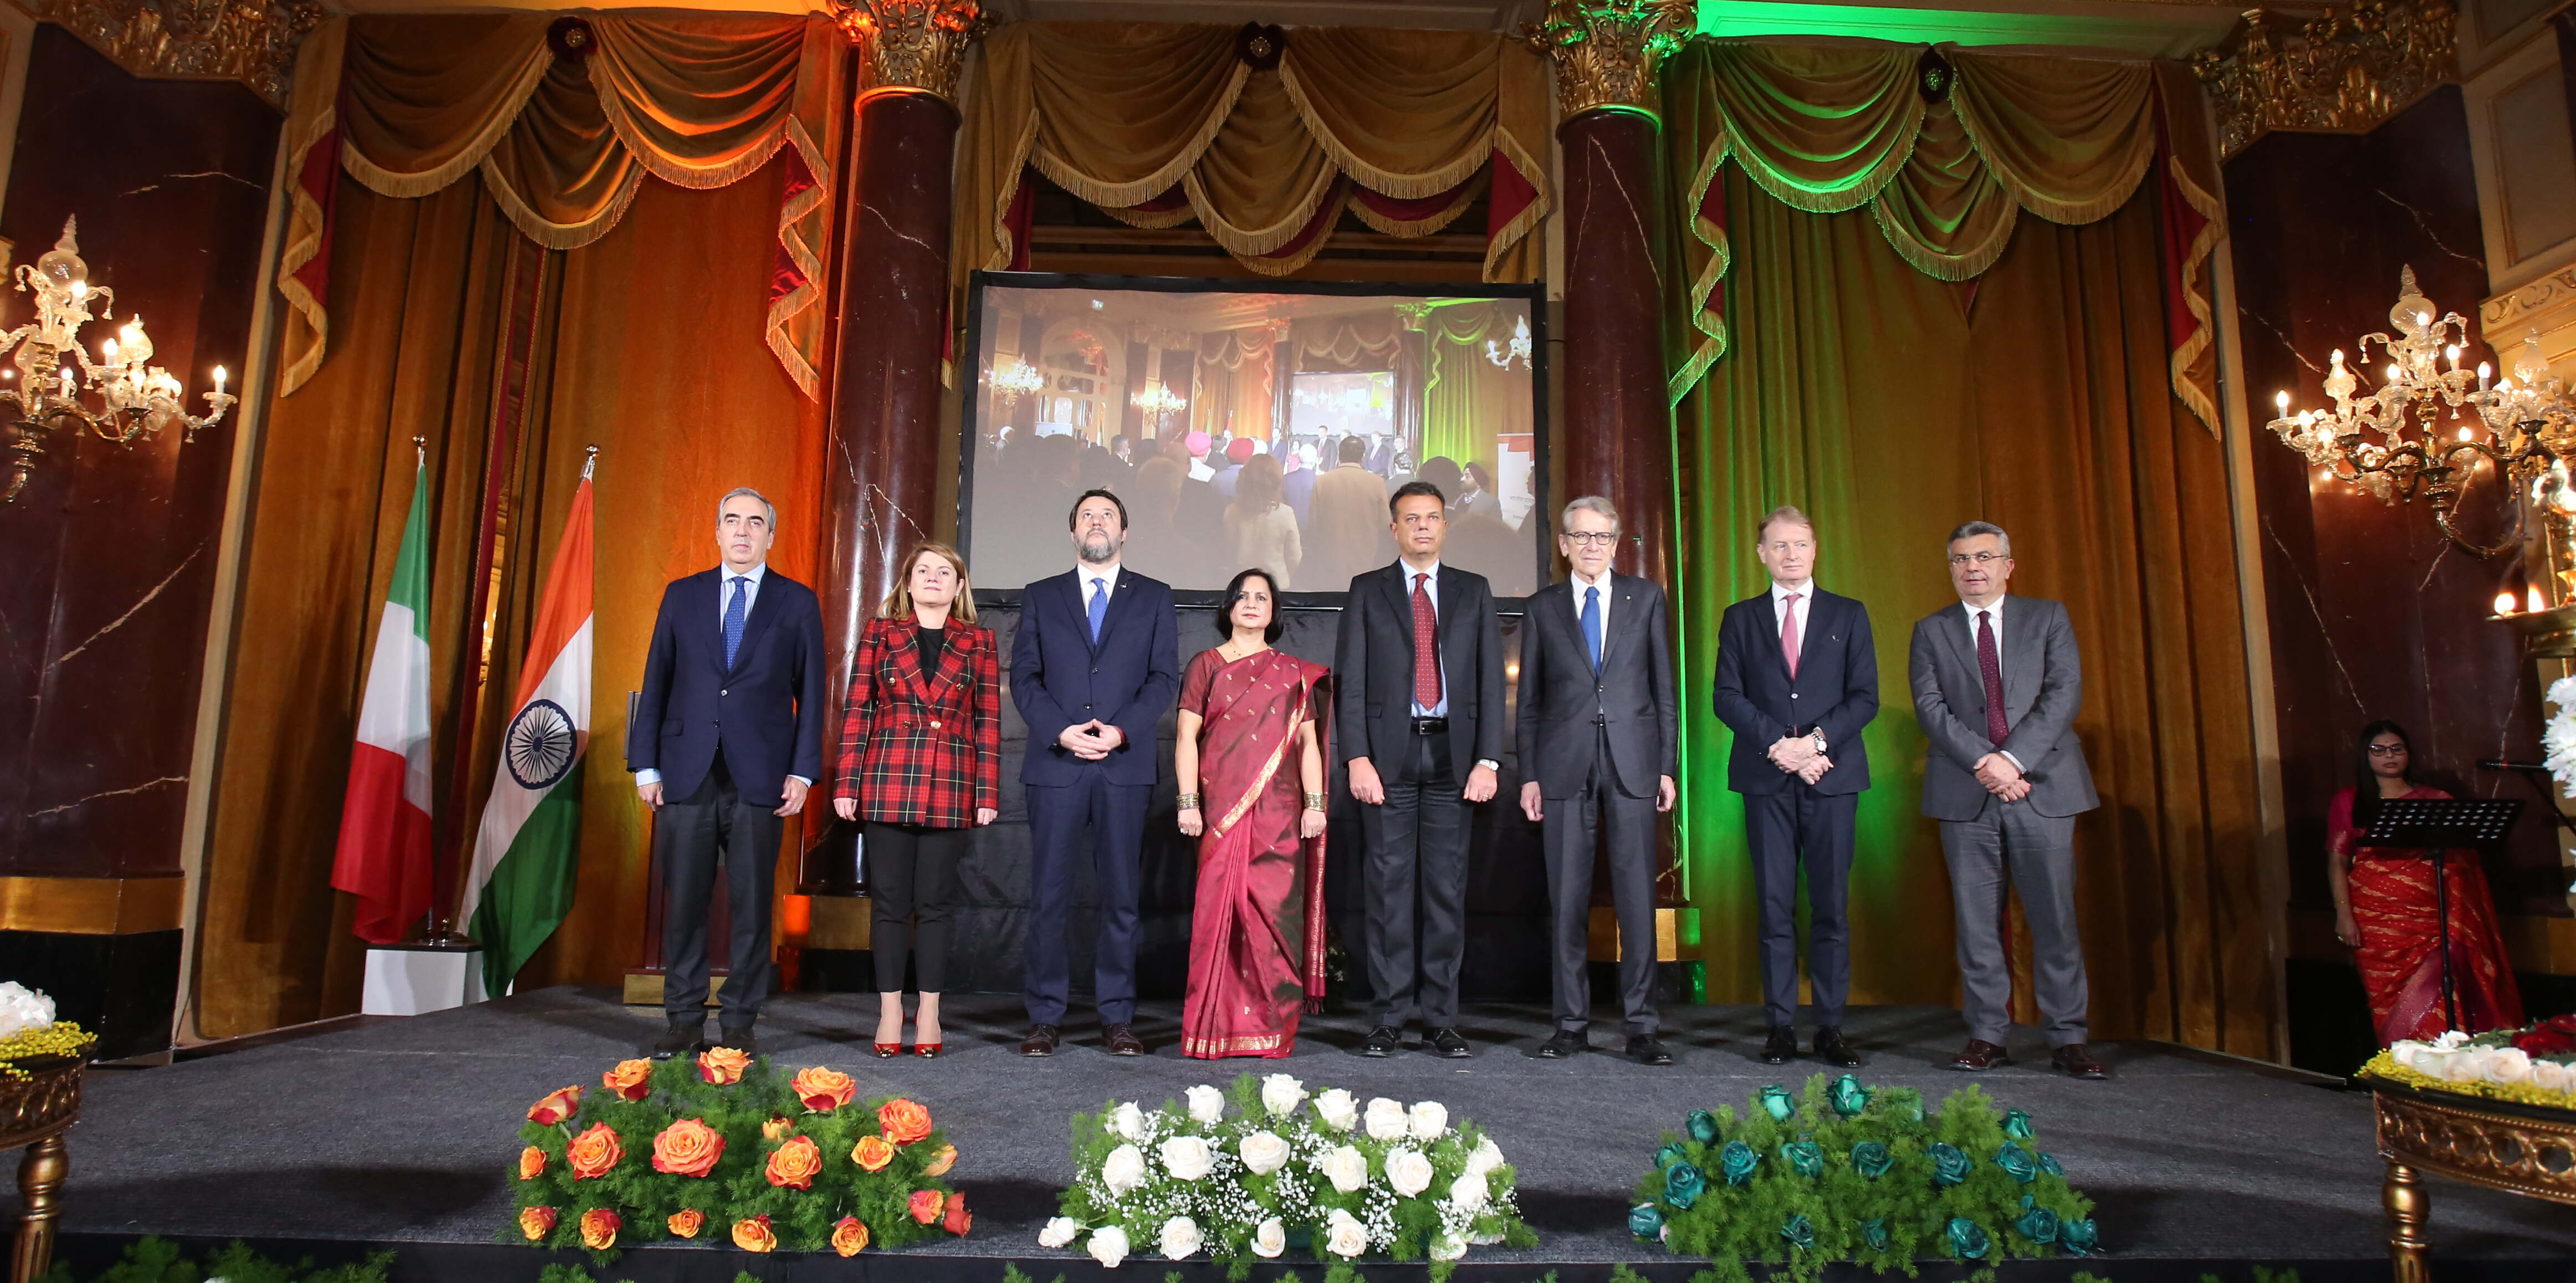 Gala Reception on the occasion of 74th Republic Day of India